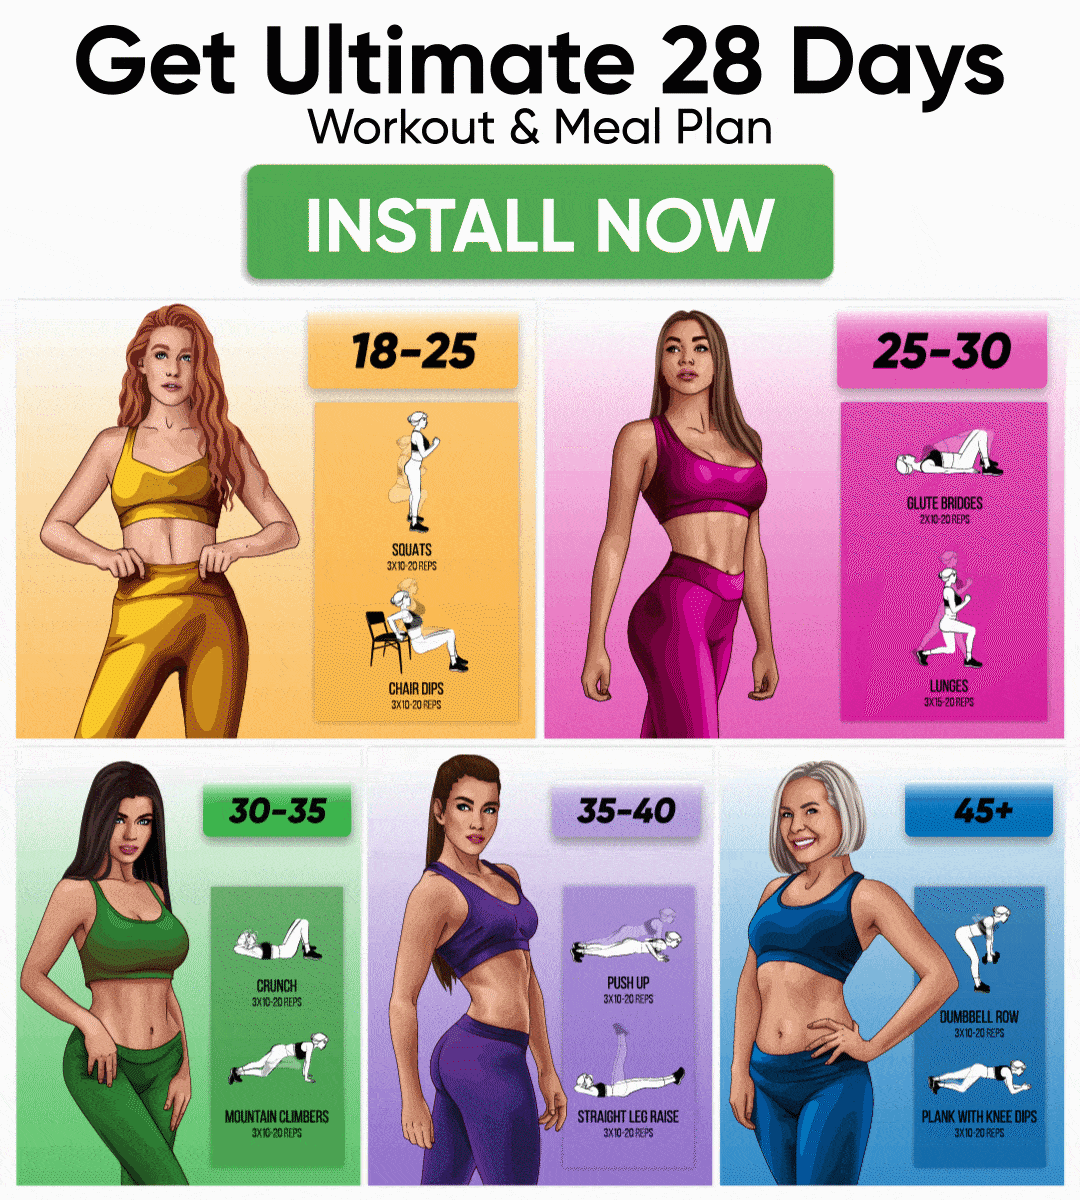 Get Ultimate 28 Days Workout & Meal Plan